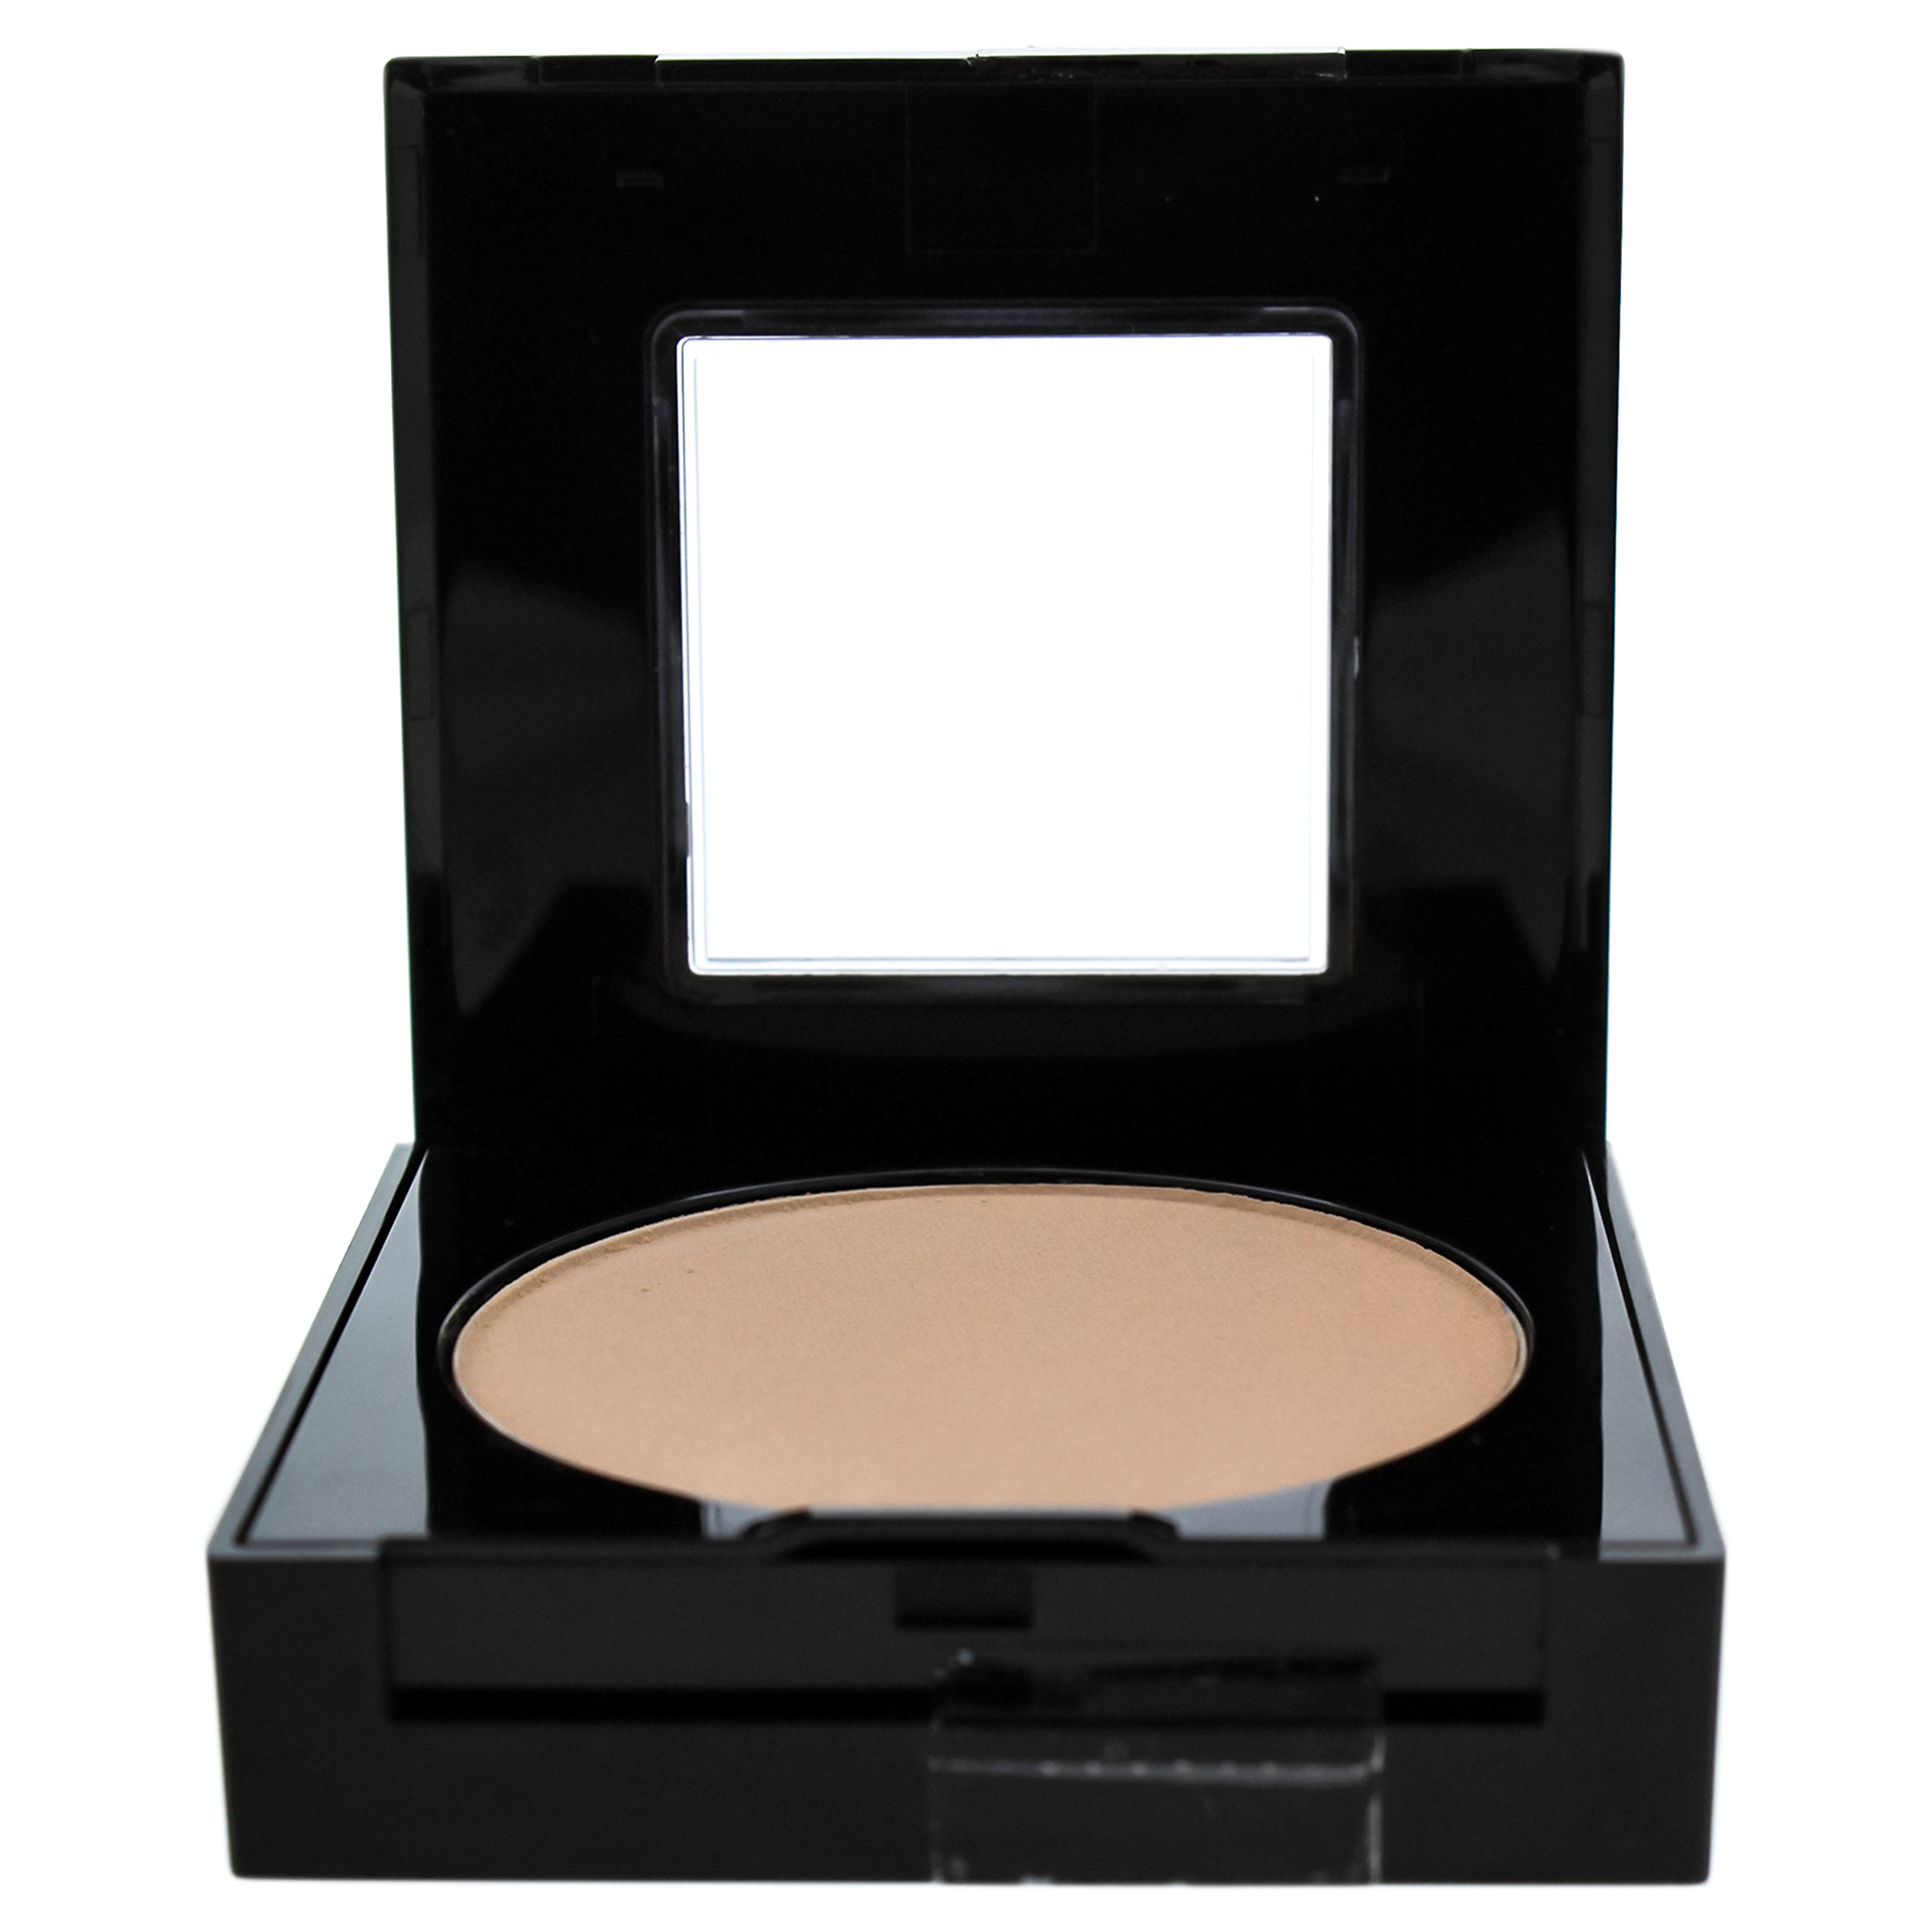 Maybelline Fit Me Set + Smooth Powder, Natural Buff - image 2 of 2